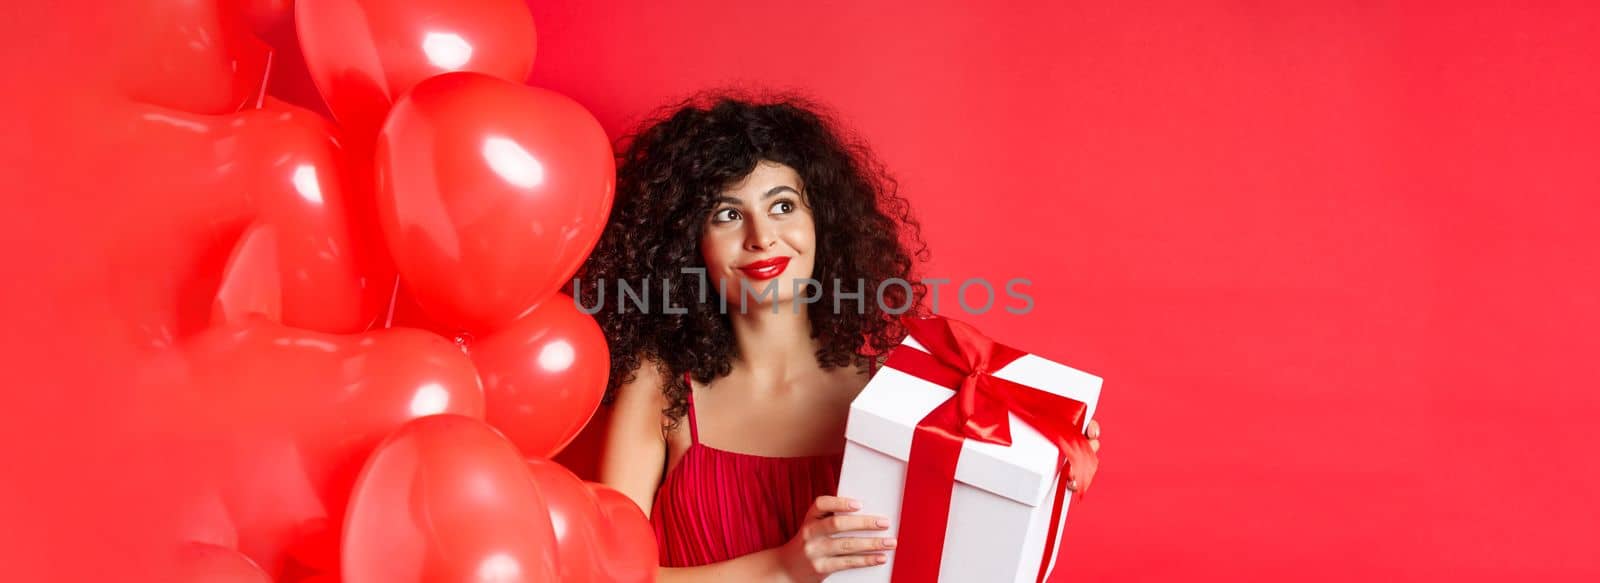 Gorgeous woman with makeup and evening dress, receive surprise gift and smiling, standing on red background near Valentines day romantic balloons by Benzoix